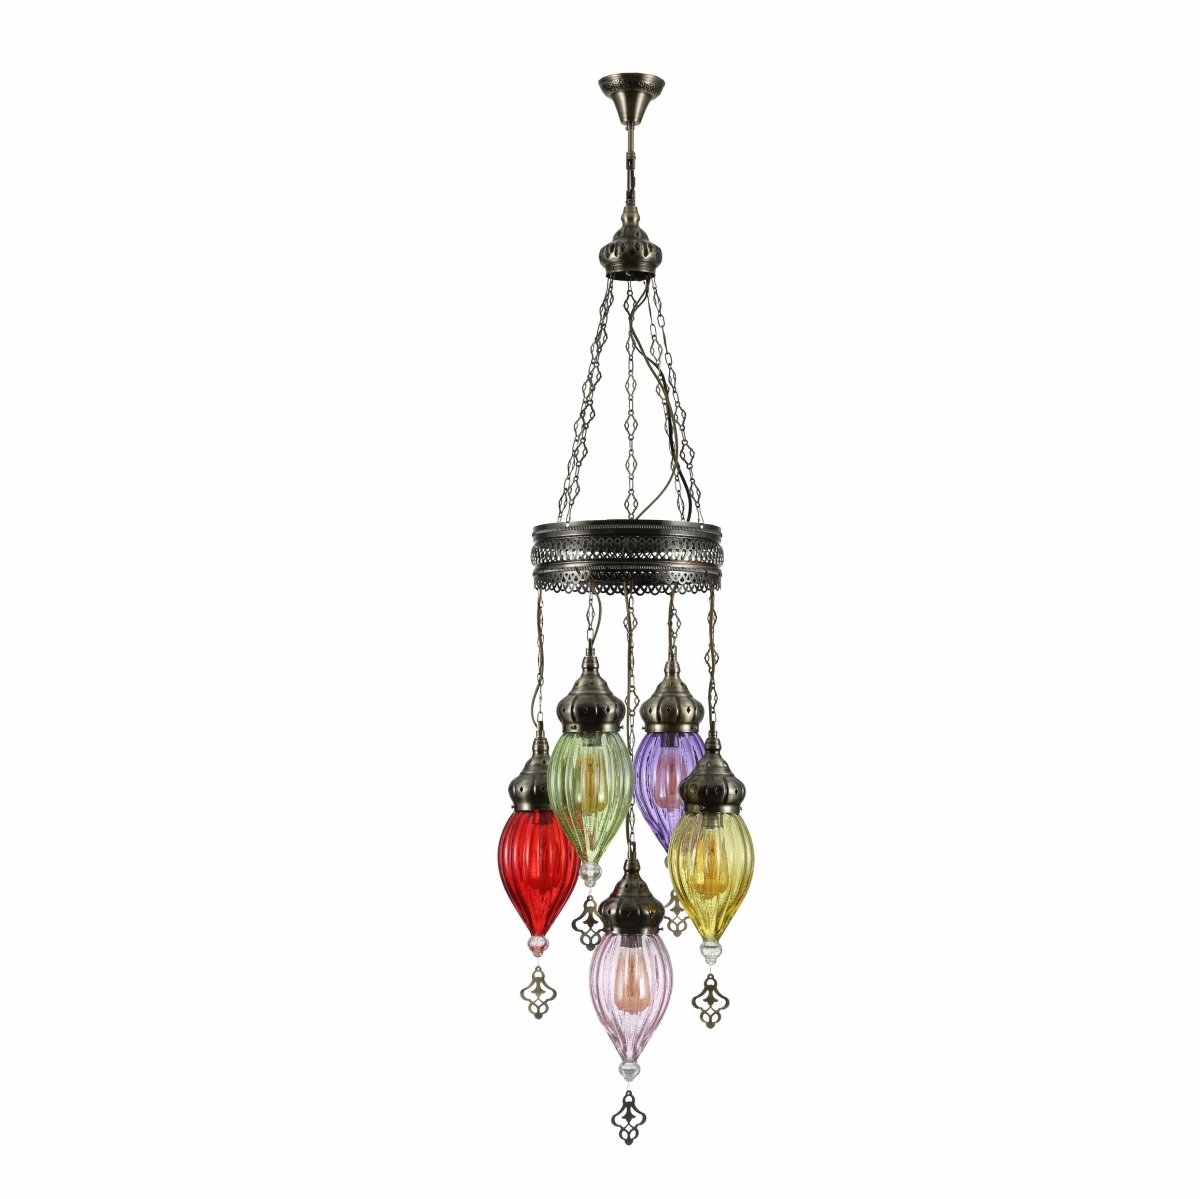 Main image of Moroccan Style Antique Brass and Multi Colour Glass Chandelier Pendant Light 5xE27 | TEKLED 158-19560